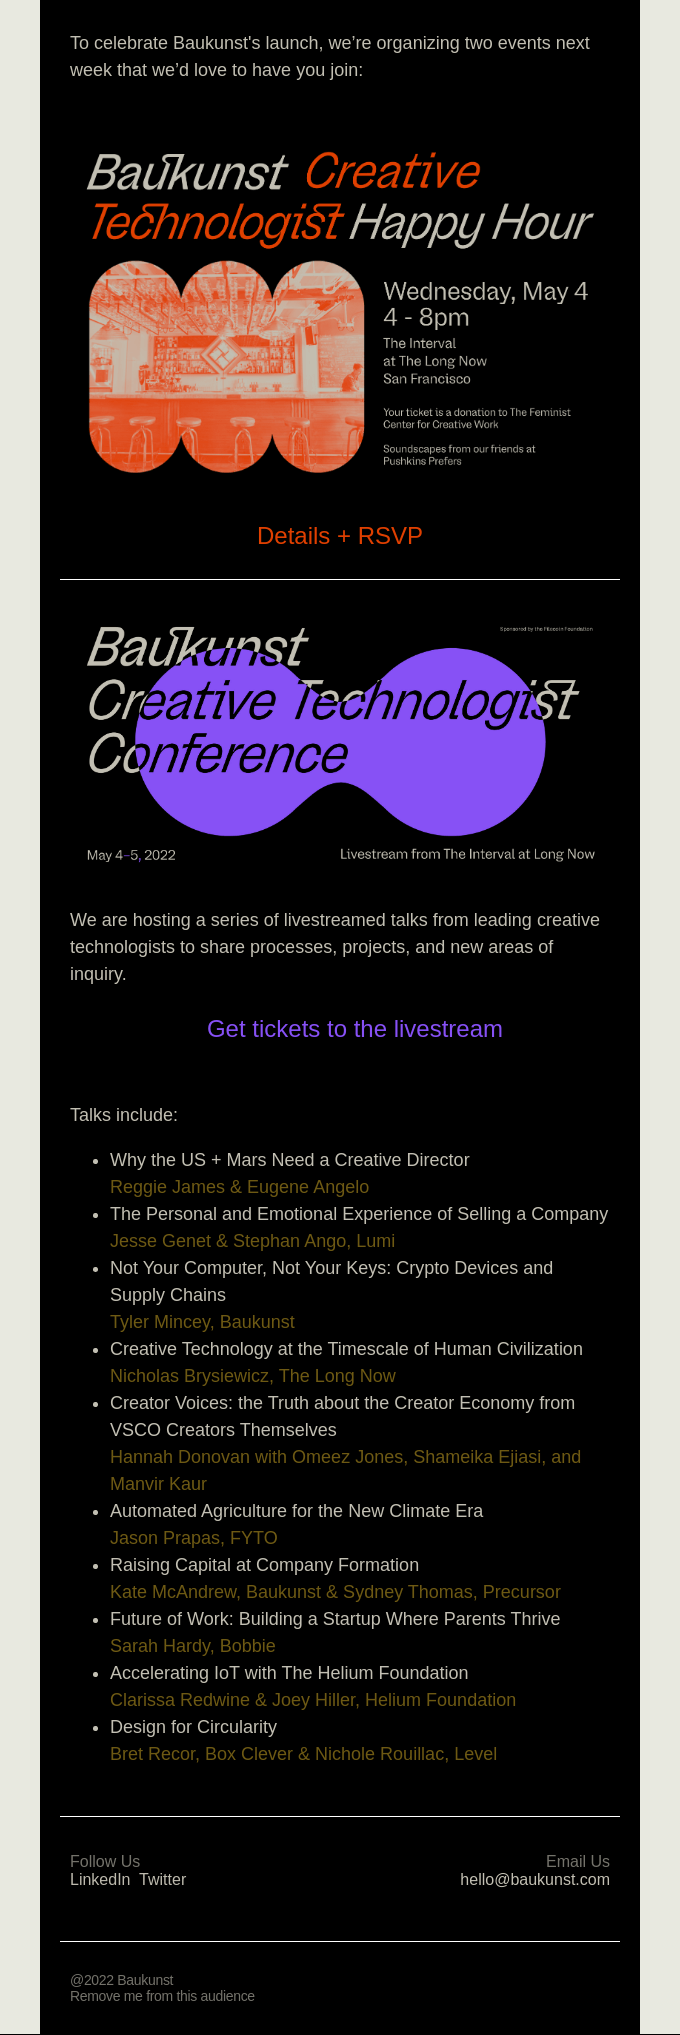 You're invited: Creative Technologist Happy Hour + Livestream